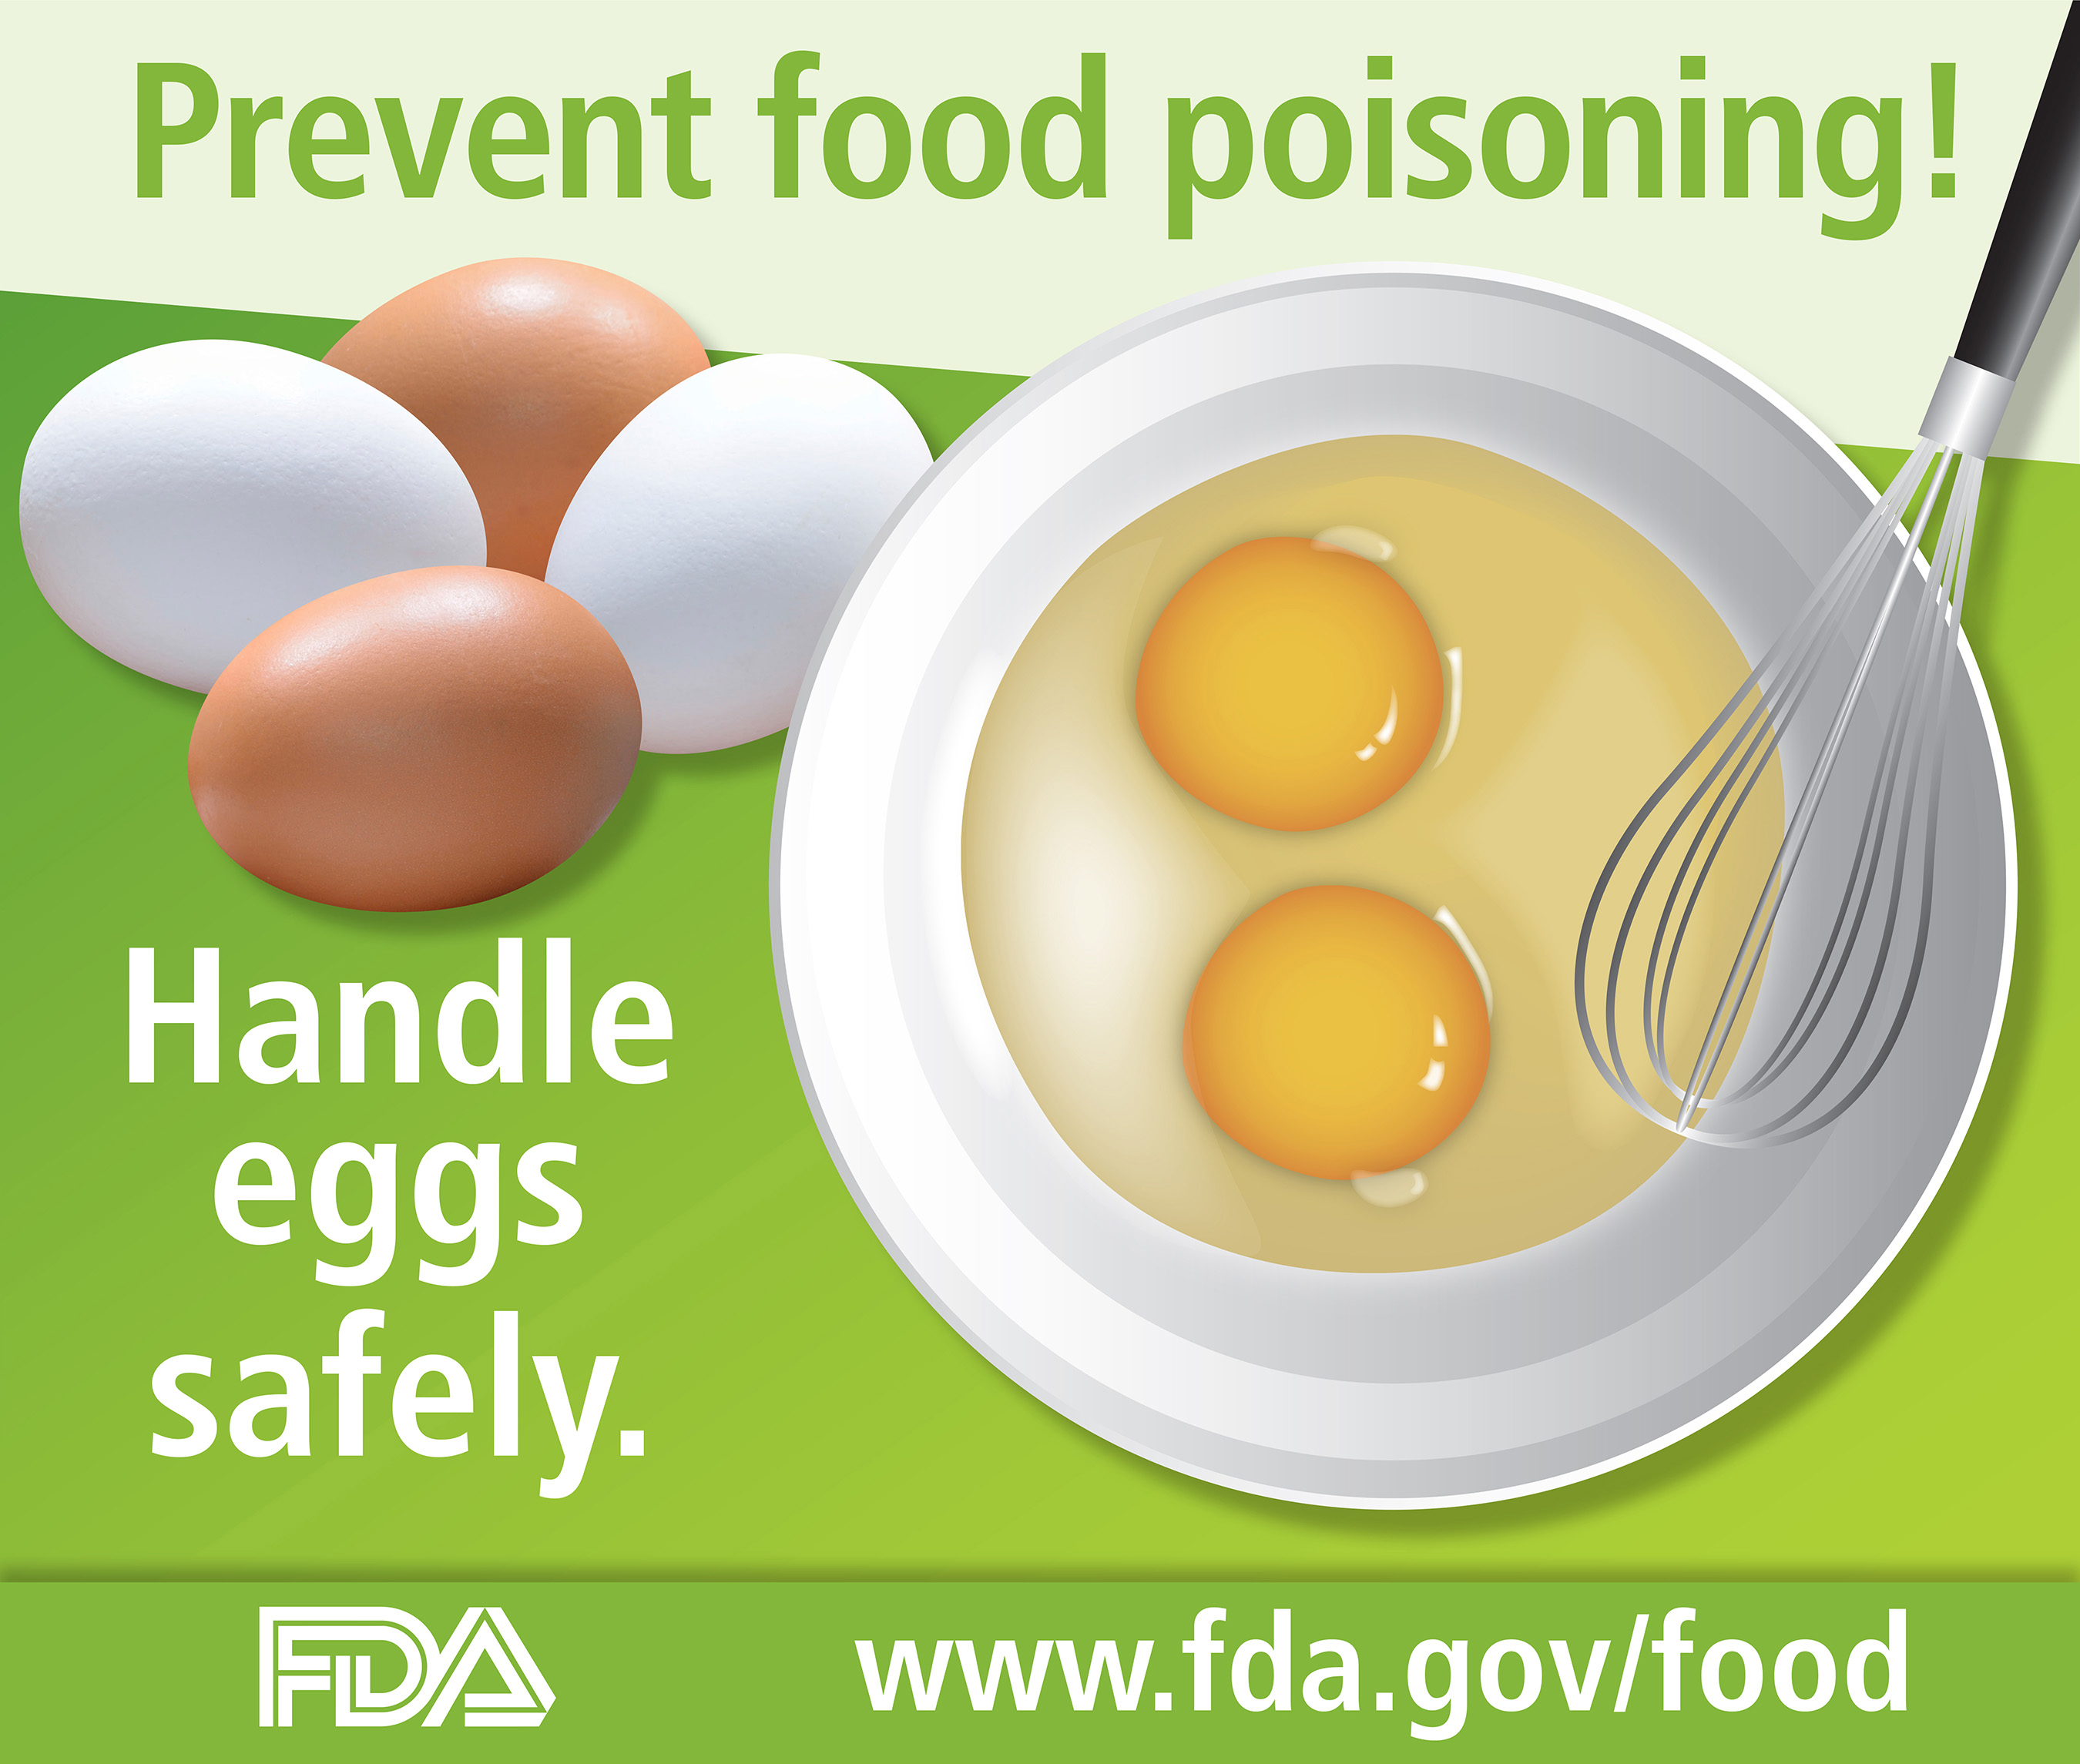 Prevent food poisoning! Handle eggs safely.